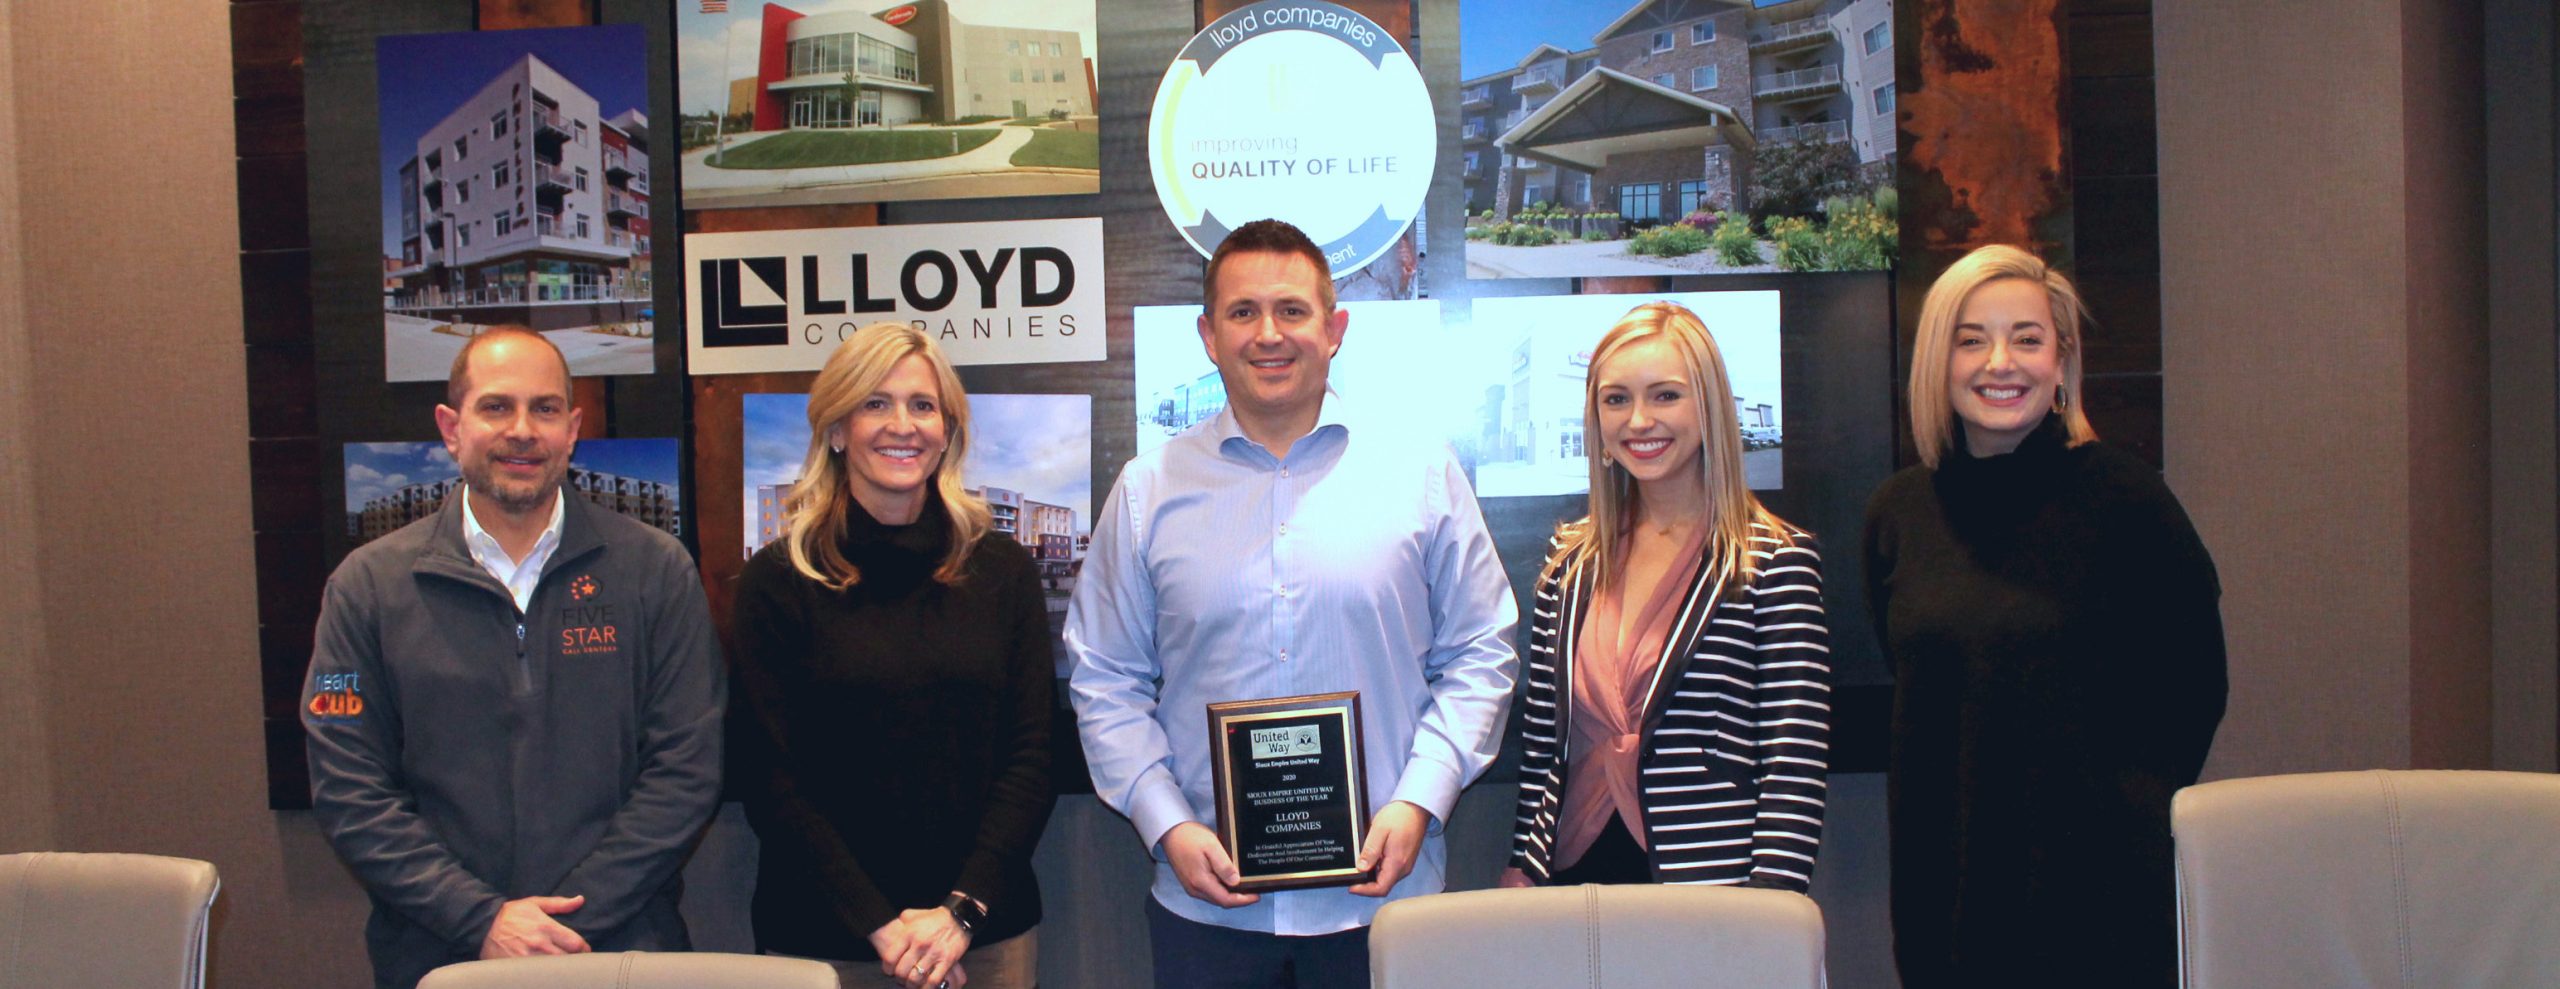 Lloyd Companies Honored With United Way Business Of The Year Award